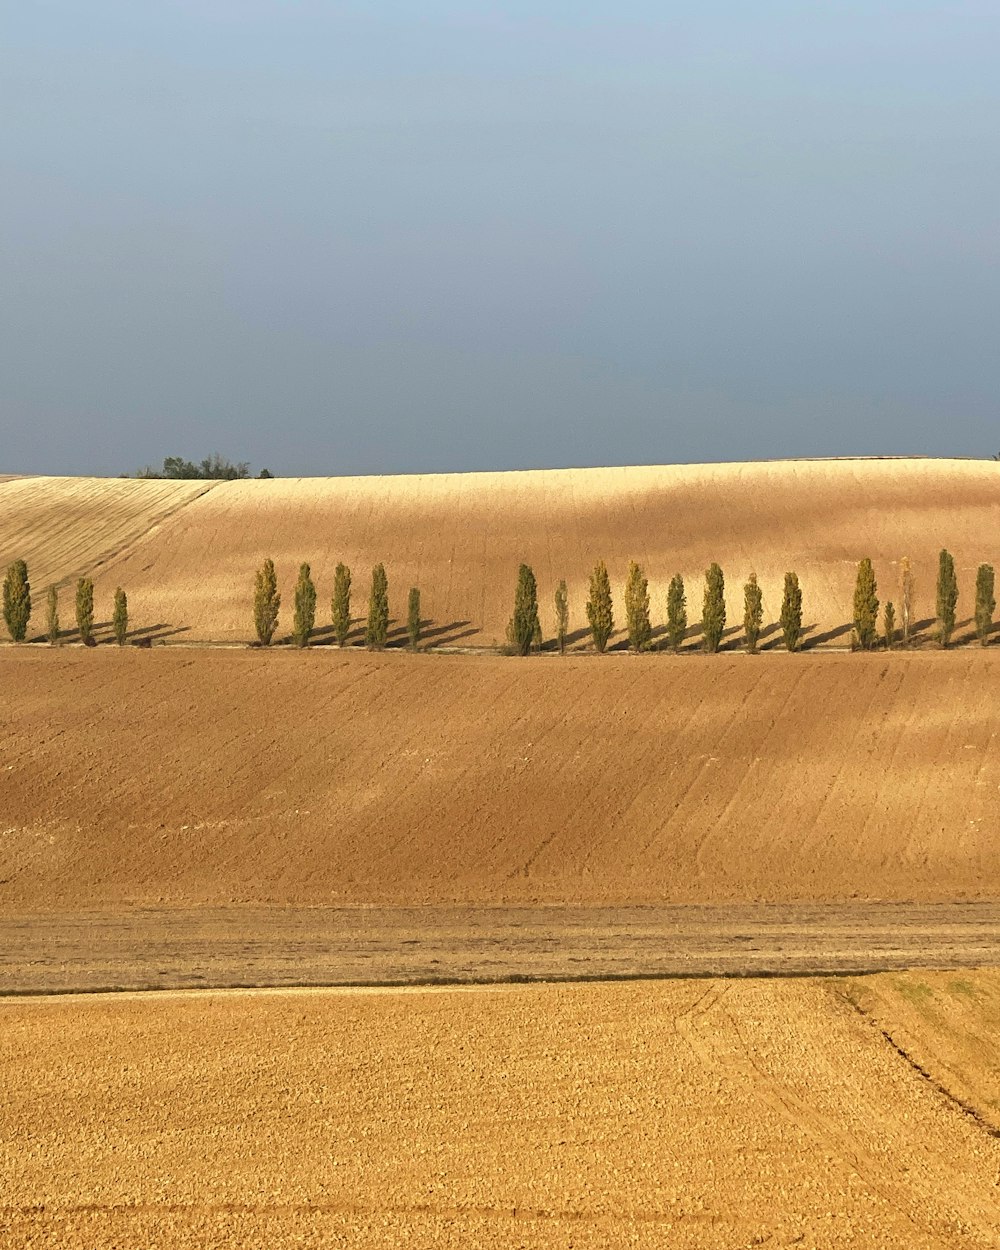 a row of trees in the middle of a field